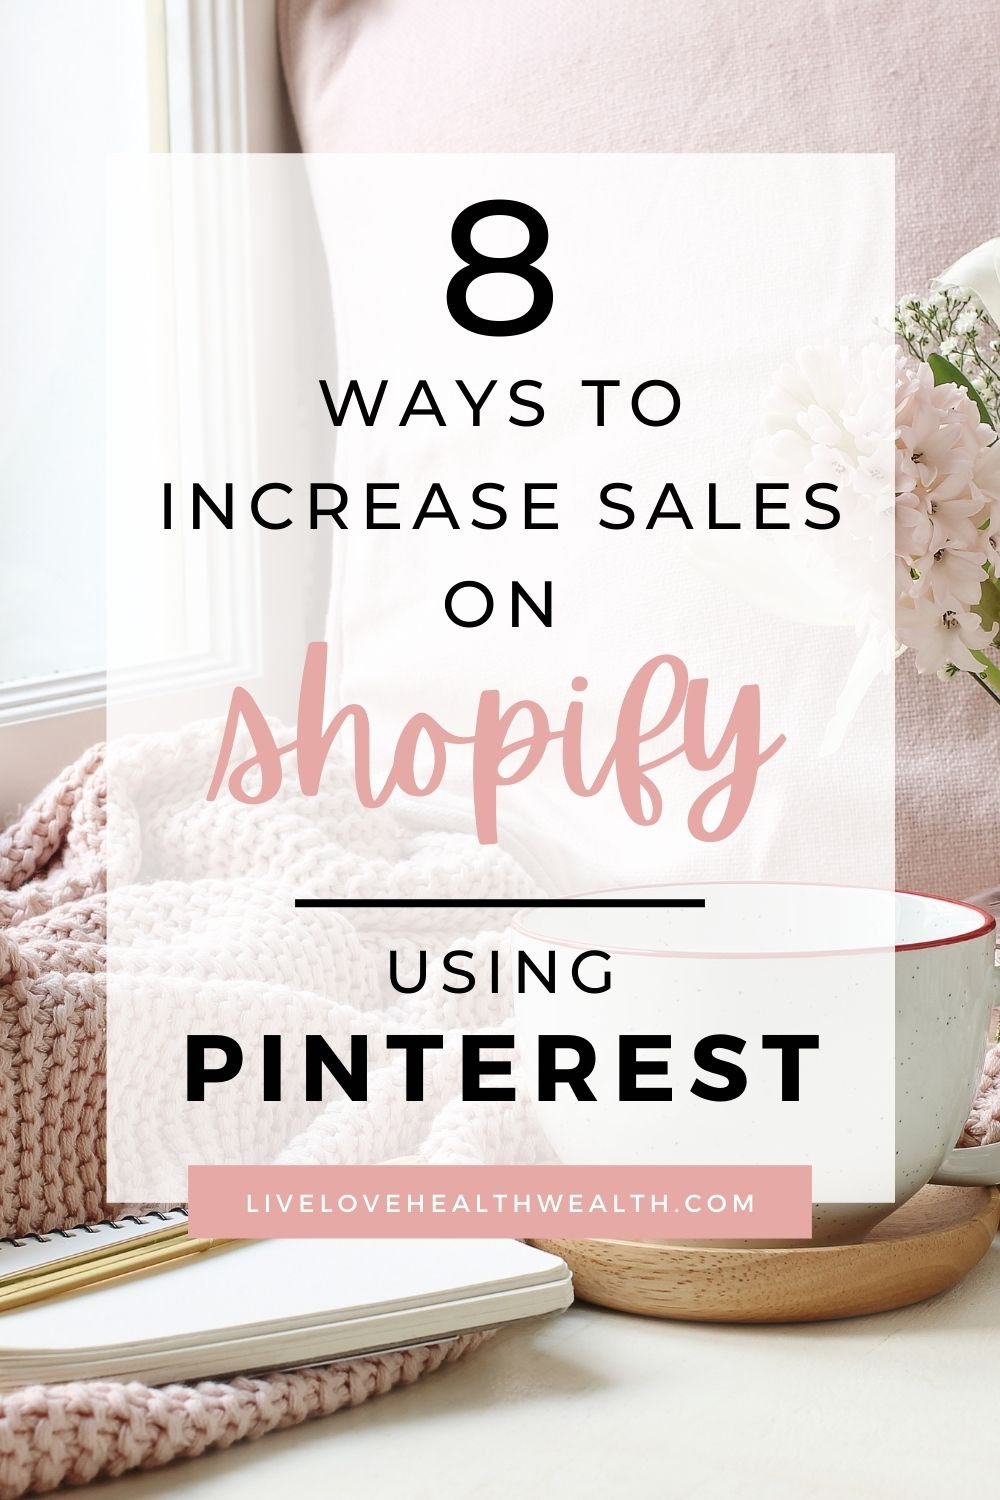 HOW TO USE PINTEREST TO DRIVE TRAFFIC TO YOUR SHOPIFY STORE